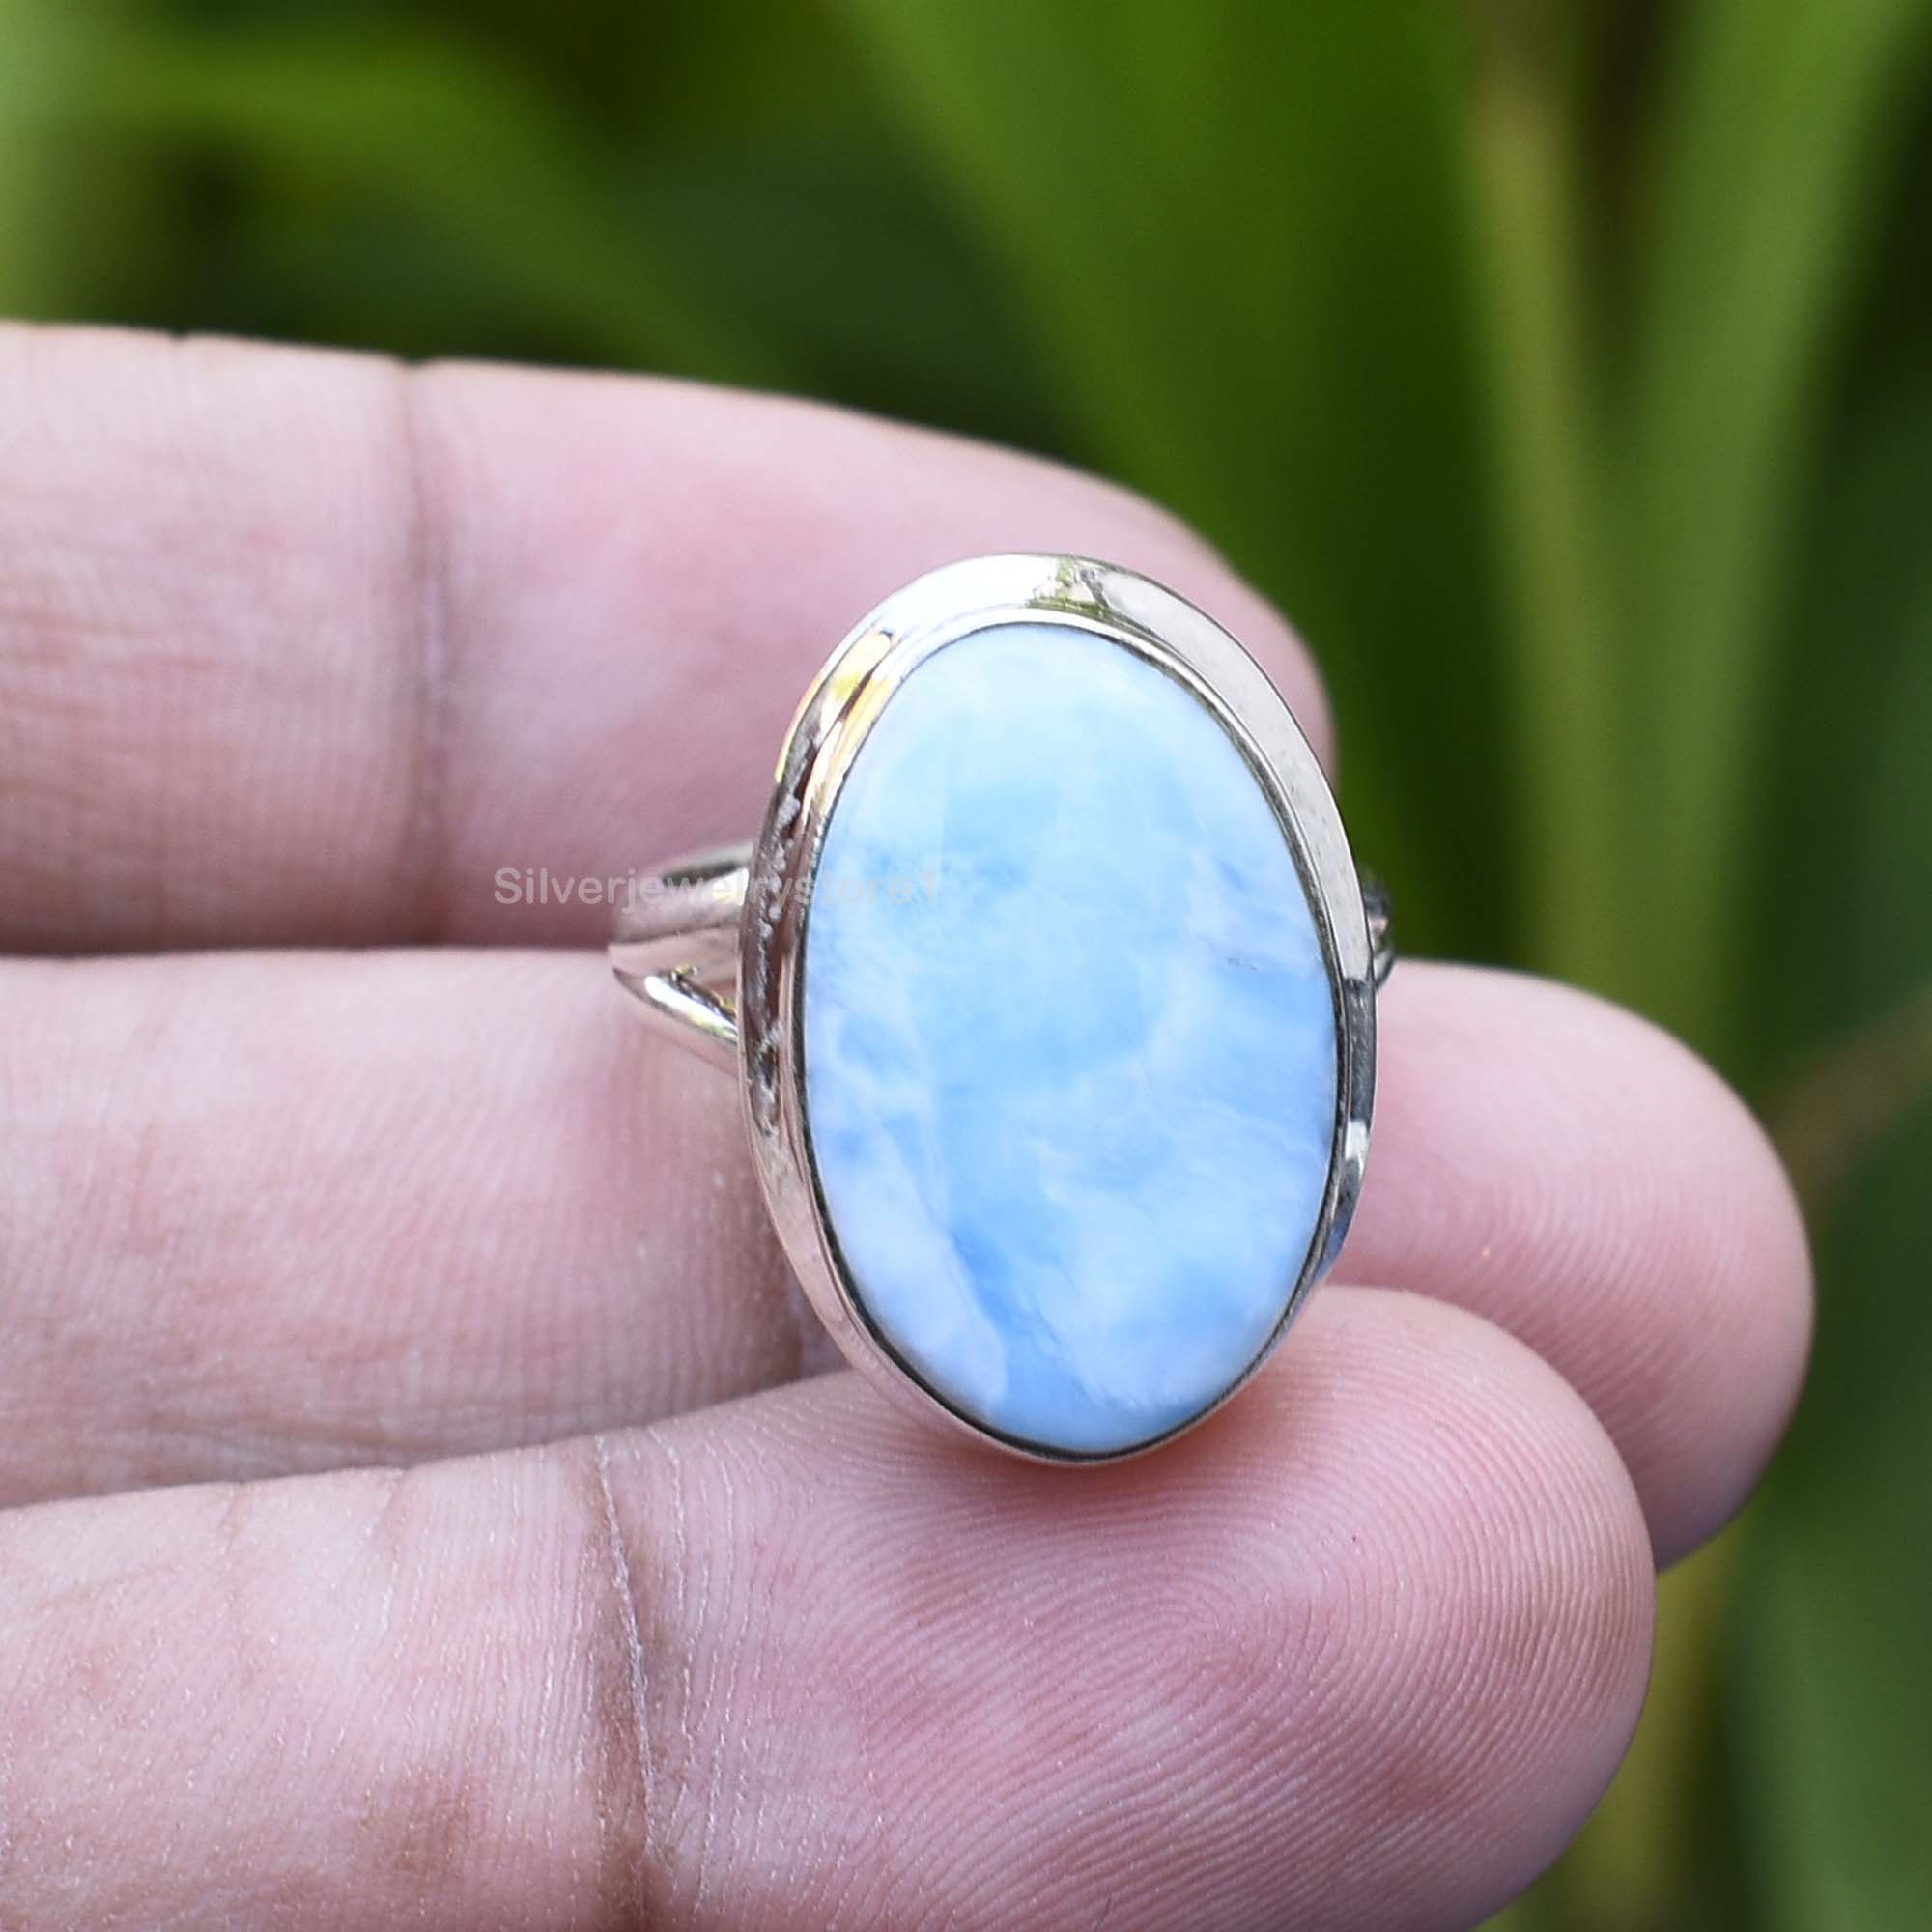 Natural Larimar Ring, 925 Sterling Silver 12x20mm Oval Shape Handmade Jewelry Size 6 Us, Etsy Ring